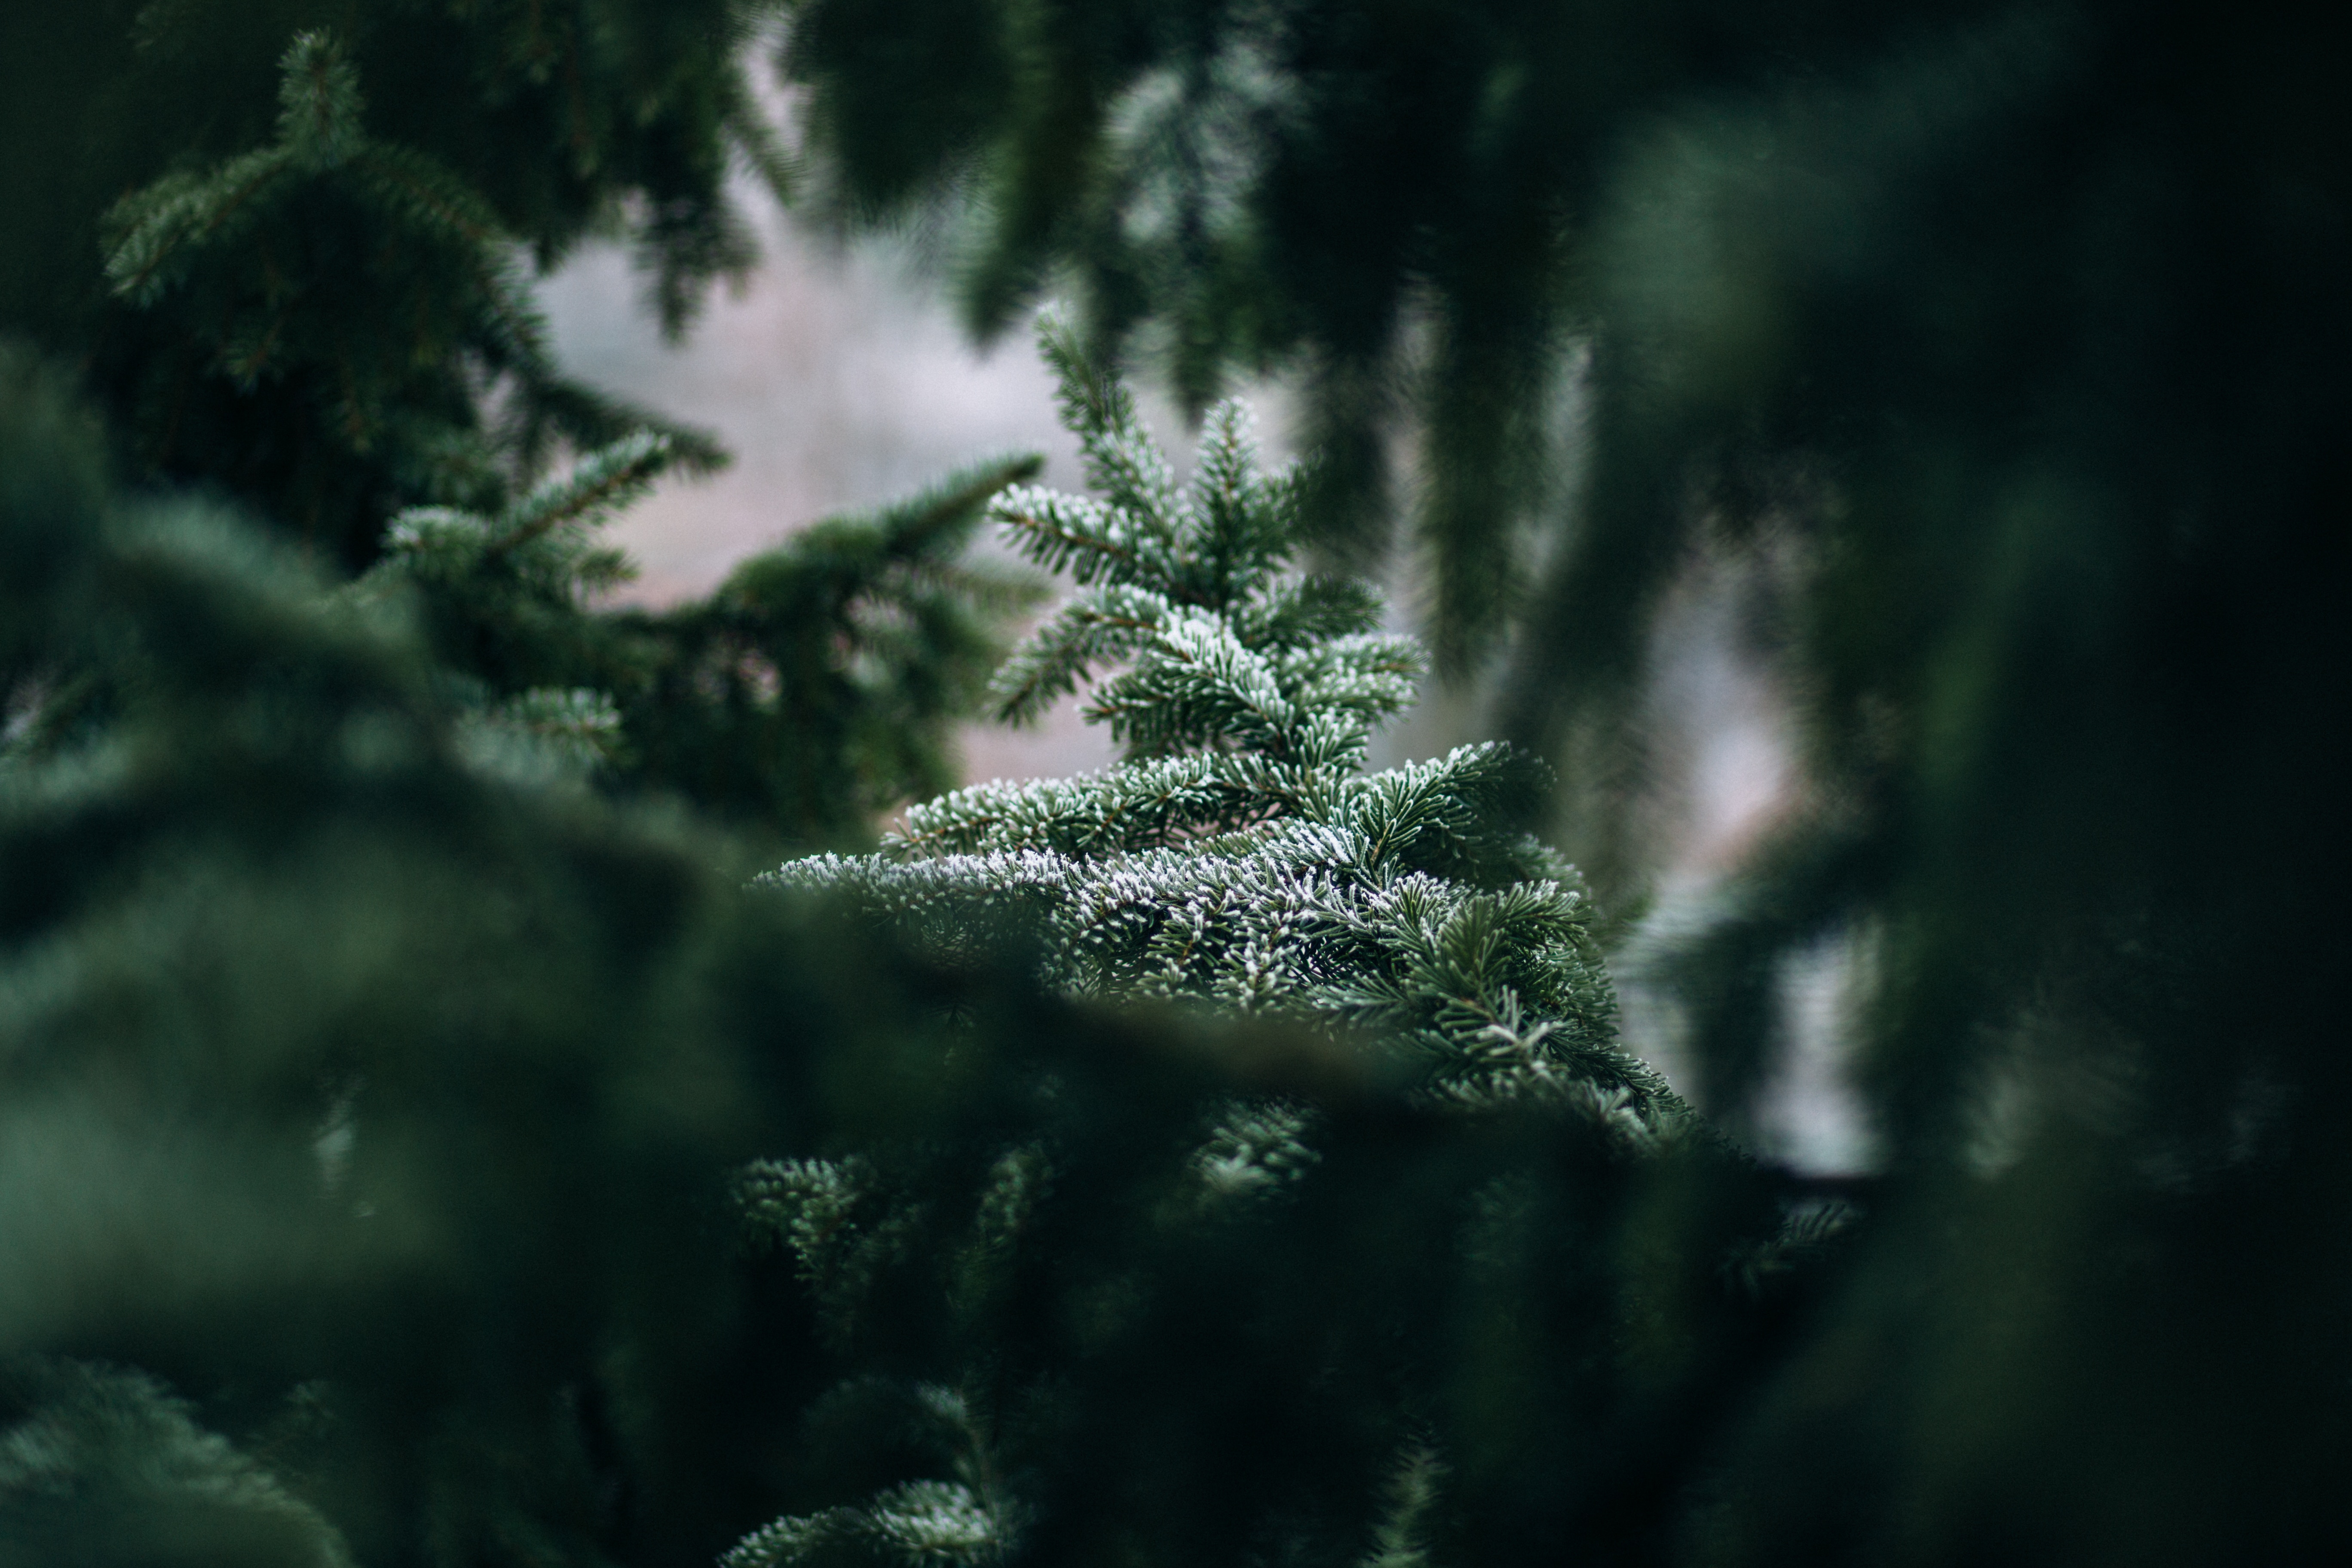 5472x3648 fir, evergreen, festive, wallpaper, branch, christmas wallpaper, spruce, waiting, snow, Free picture, christmas background, snowflake, smell, tree, season, christmas, walk, soft, winter, tradition, pine